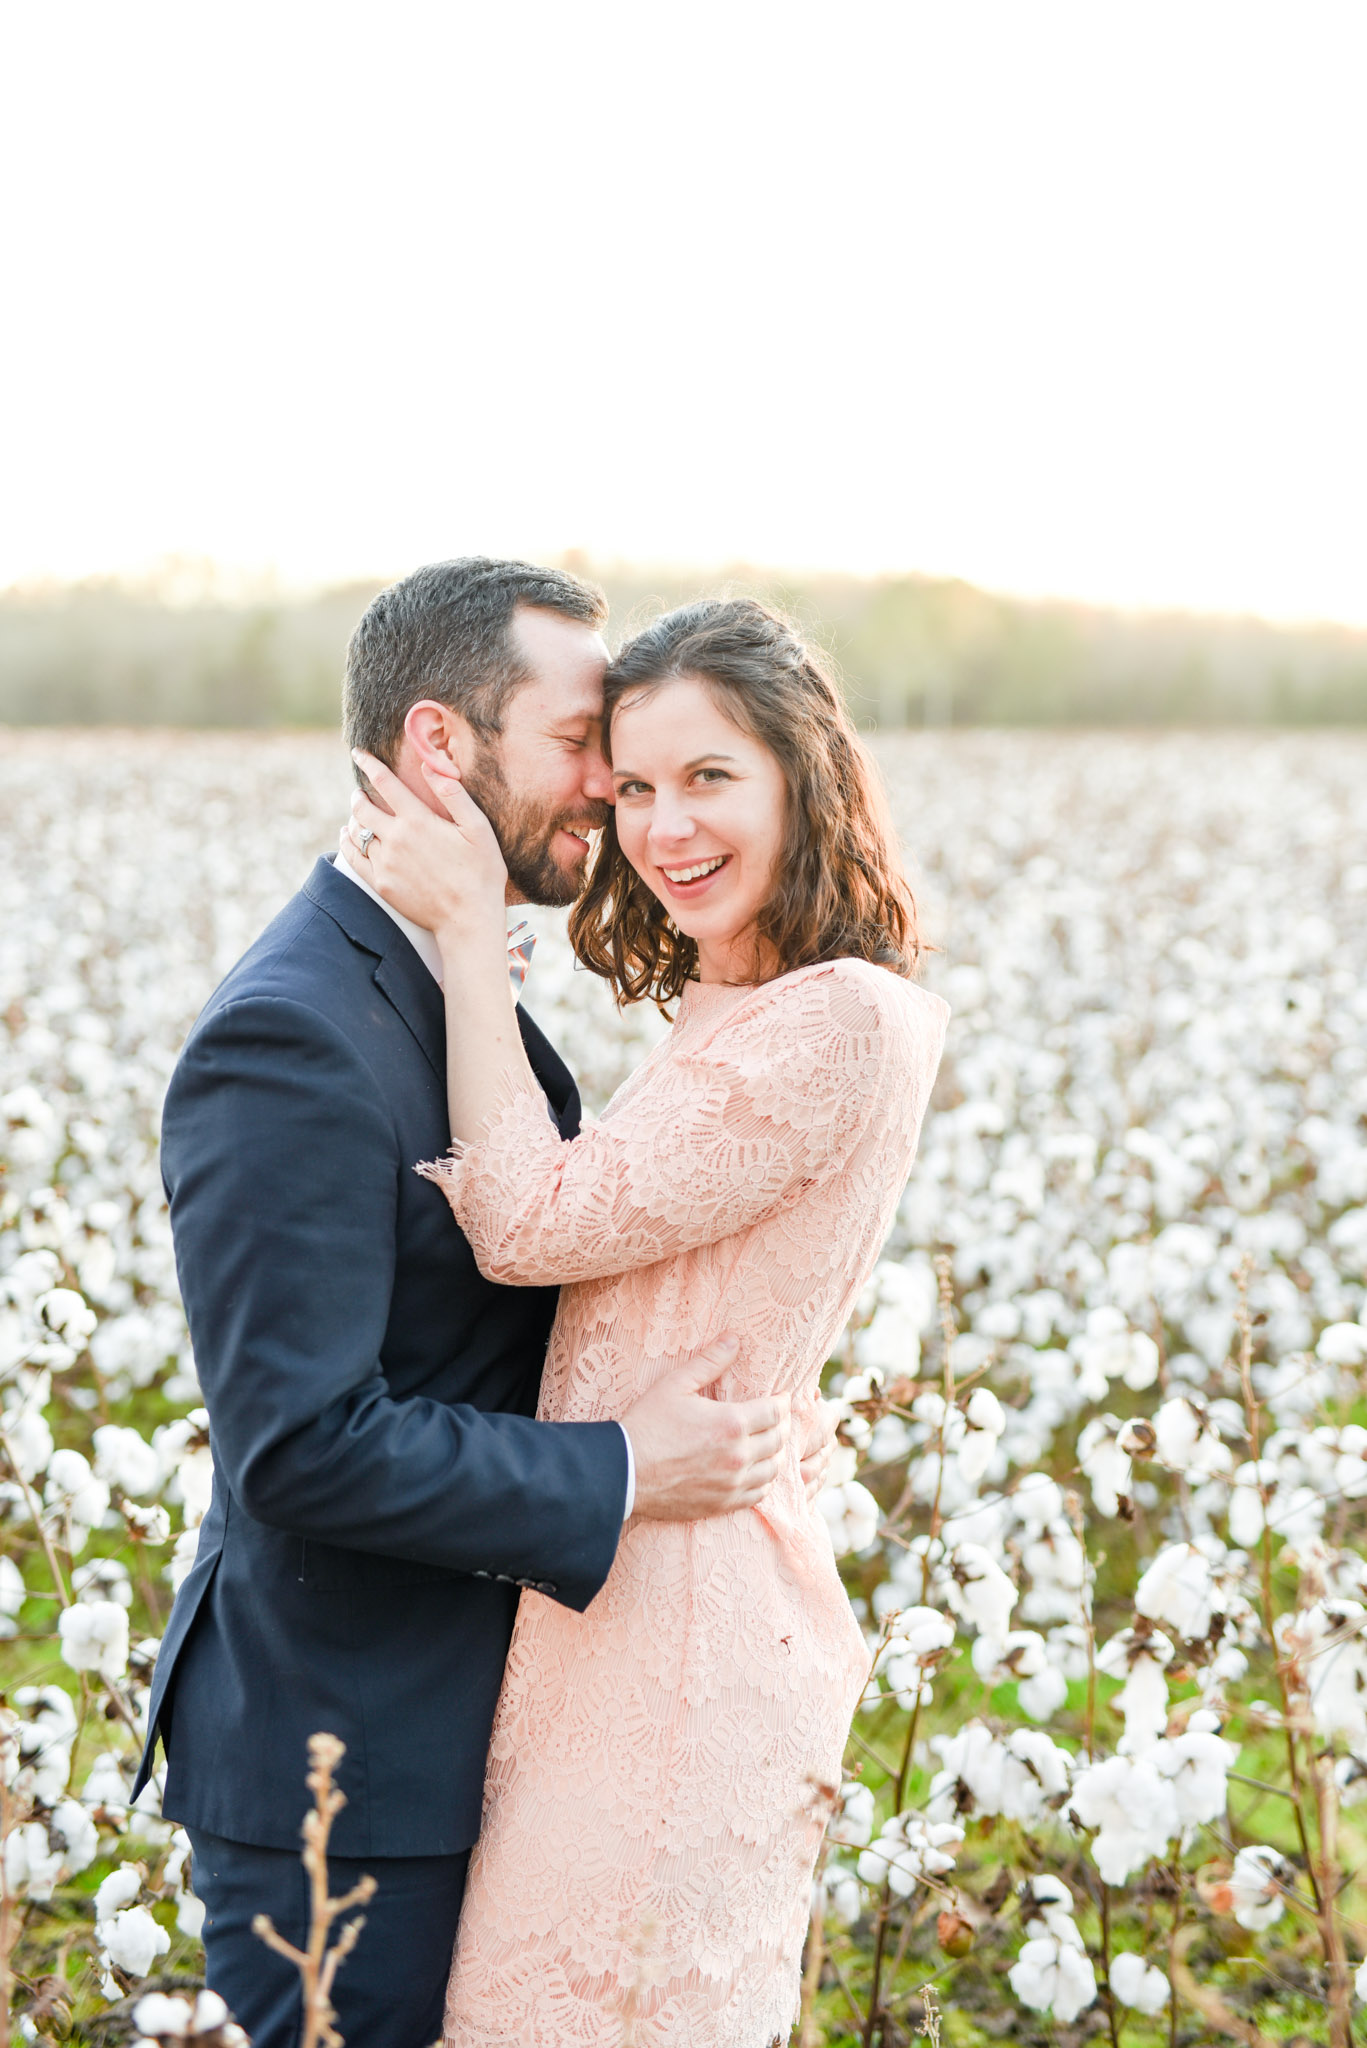 Man and woman laugh in sunset cotton field.